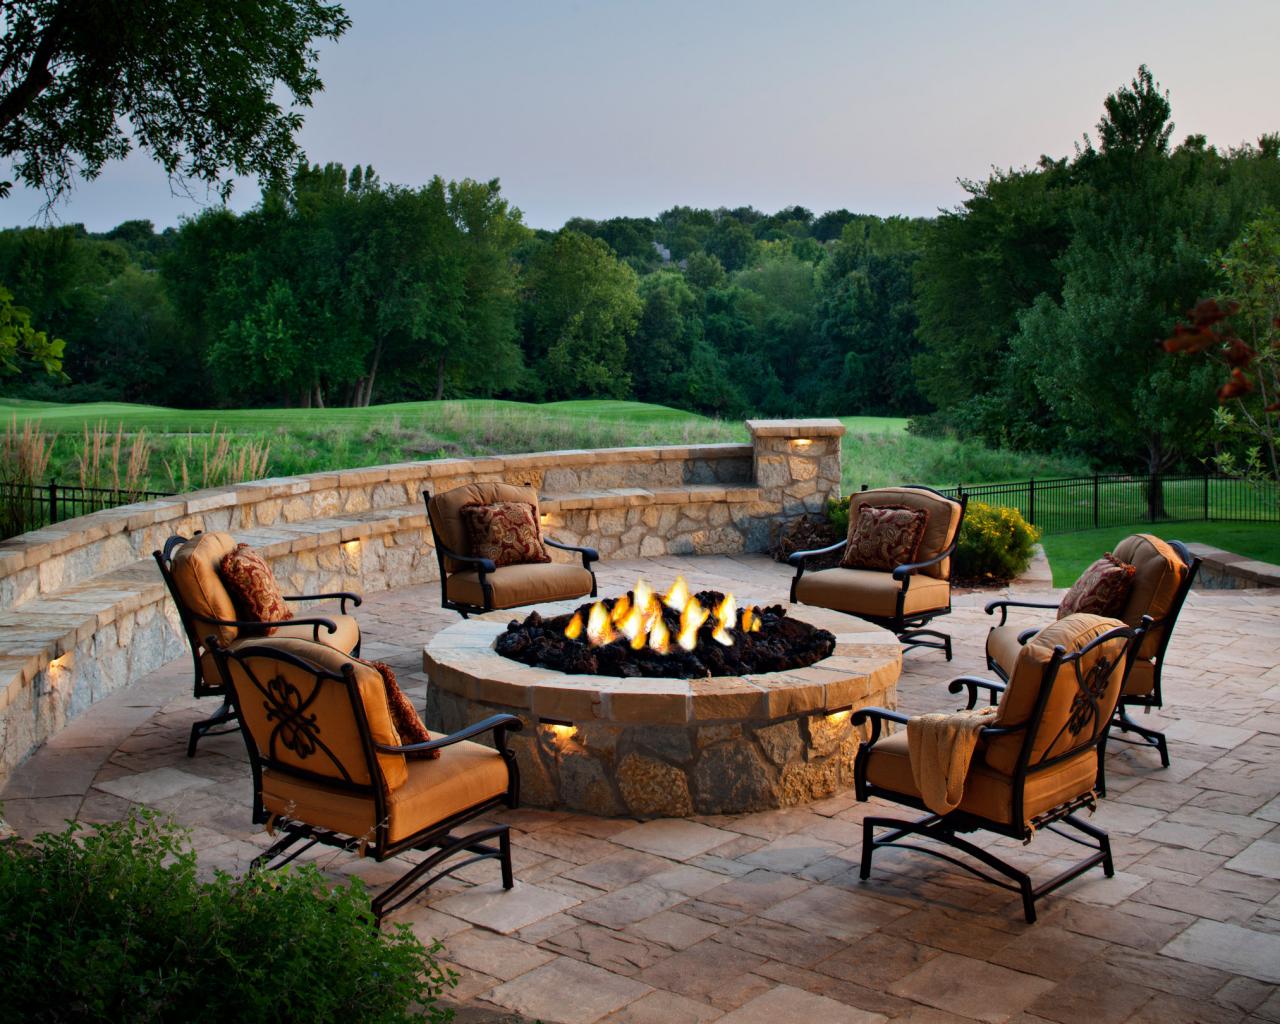 Best Chairs For Fire Pit Flash S, Best Seating Around A Fire Pit